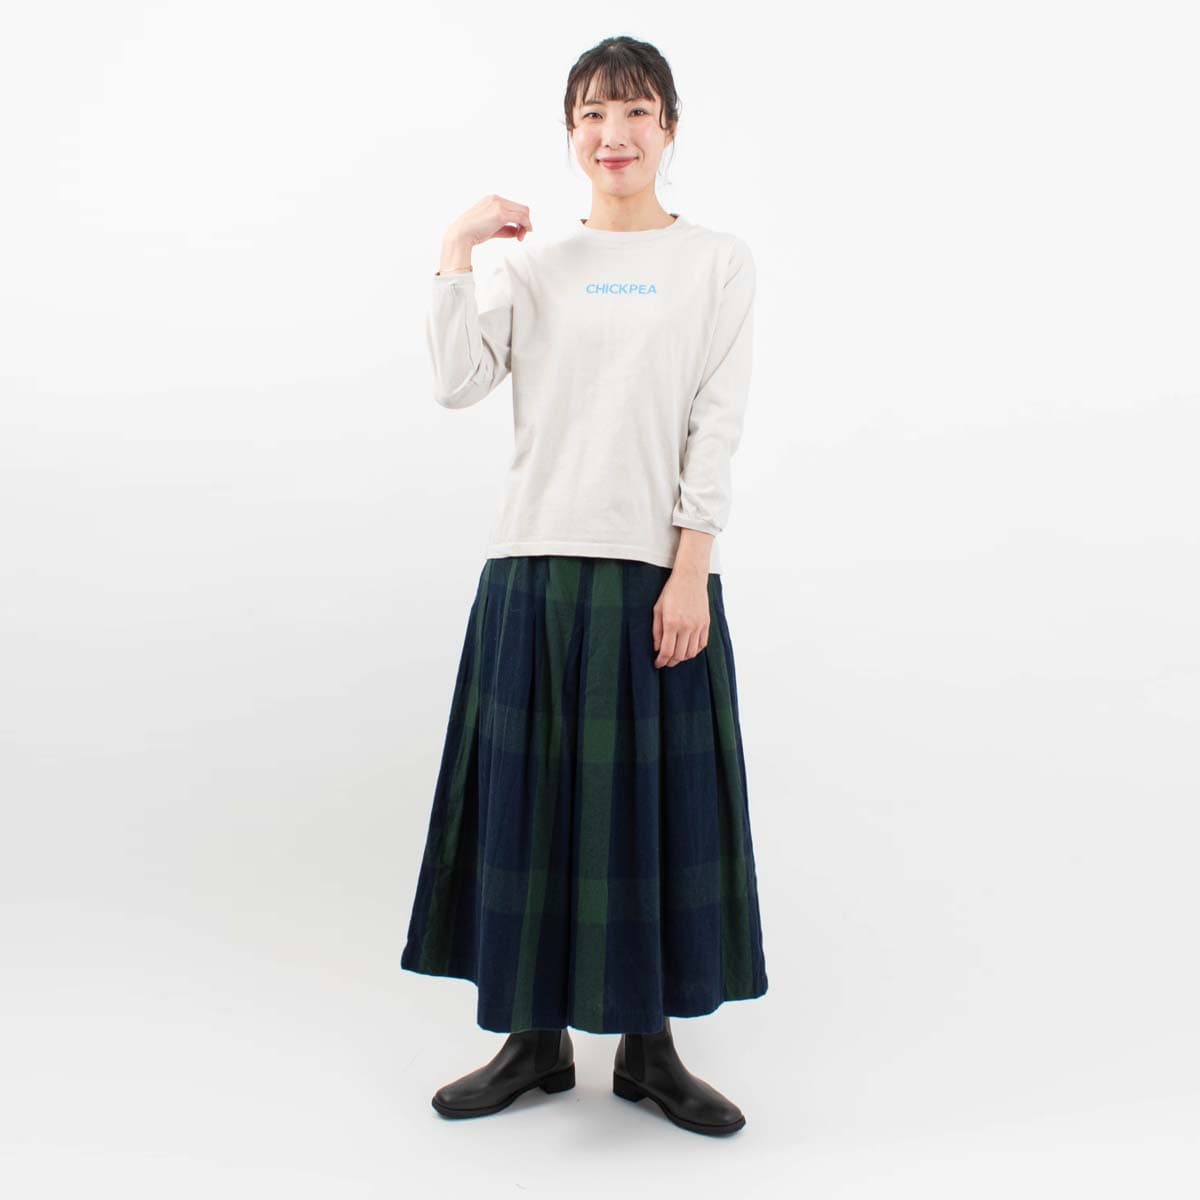 PPS-28220　PACIFIC PARK STORE 17/1BD天竺プリントプルオーバー〈CHICKPEA〉